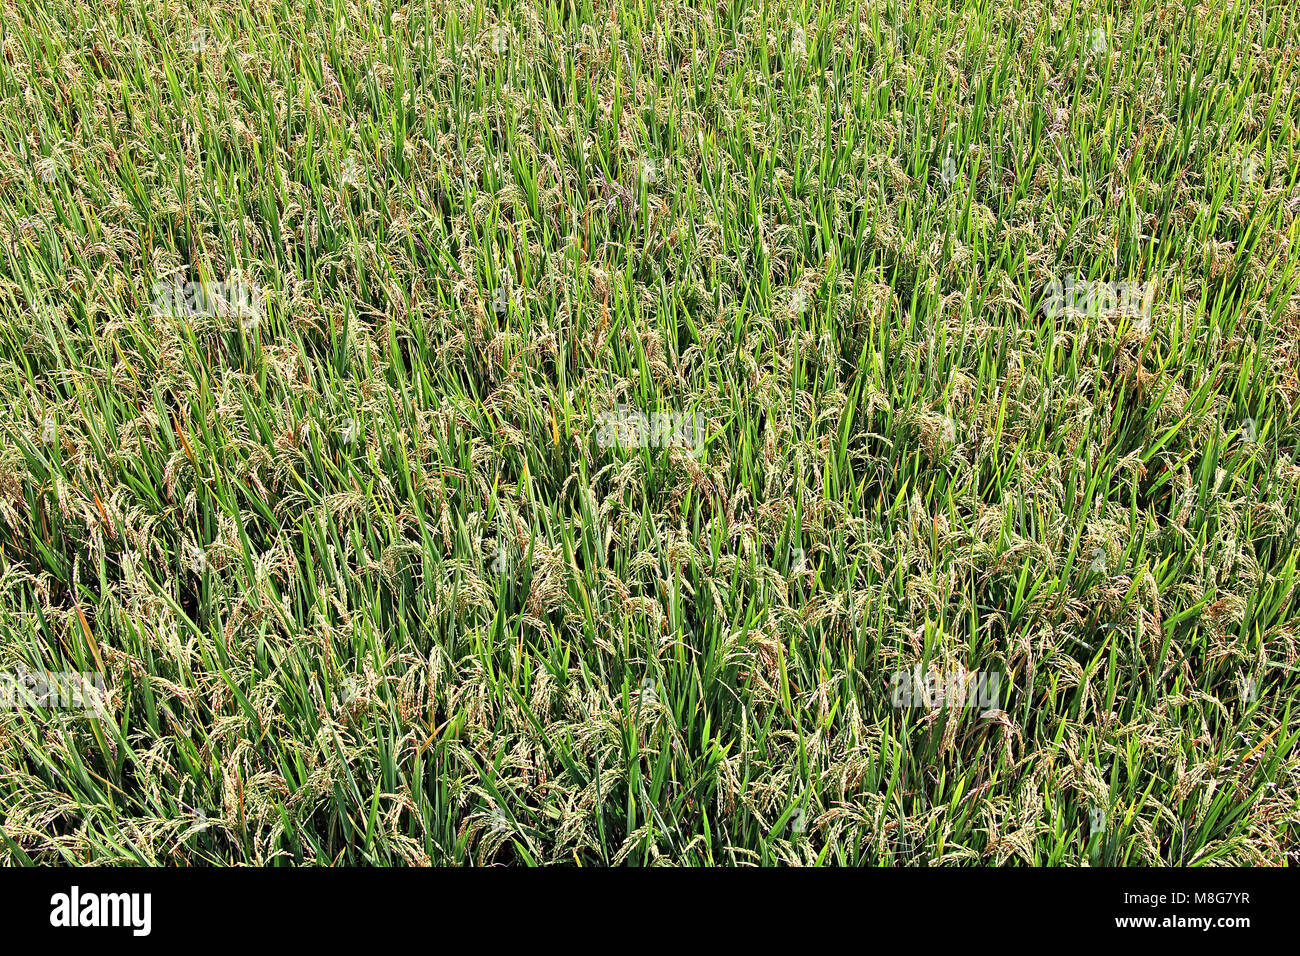 Field of ripening rice paddy plants waiting for harvesting in Kerala, India. Stock Photo